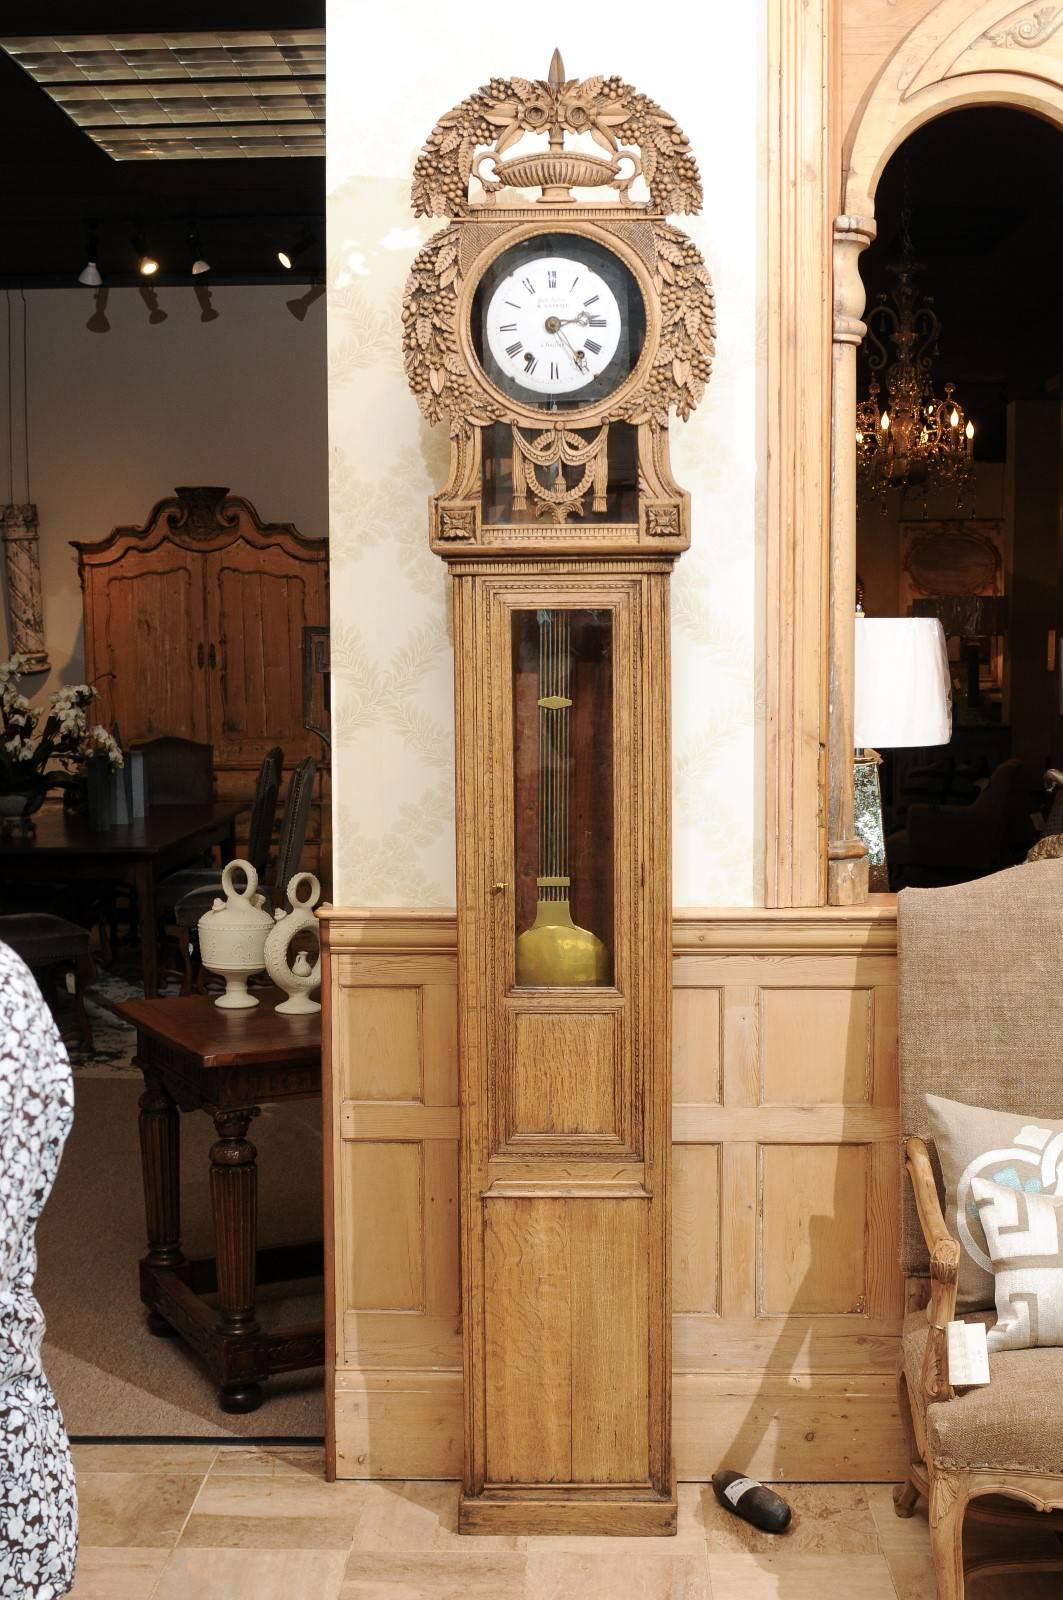 19th century carved oak tall case clock from Normandy
This type of clock is called a St. Nicolas clock as it was made in St. Nicolas-d' Aliermont near the Normandy coast. This style is known for the beautiful carved headdress surrounding the face